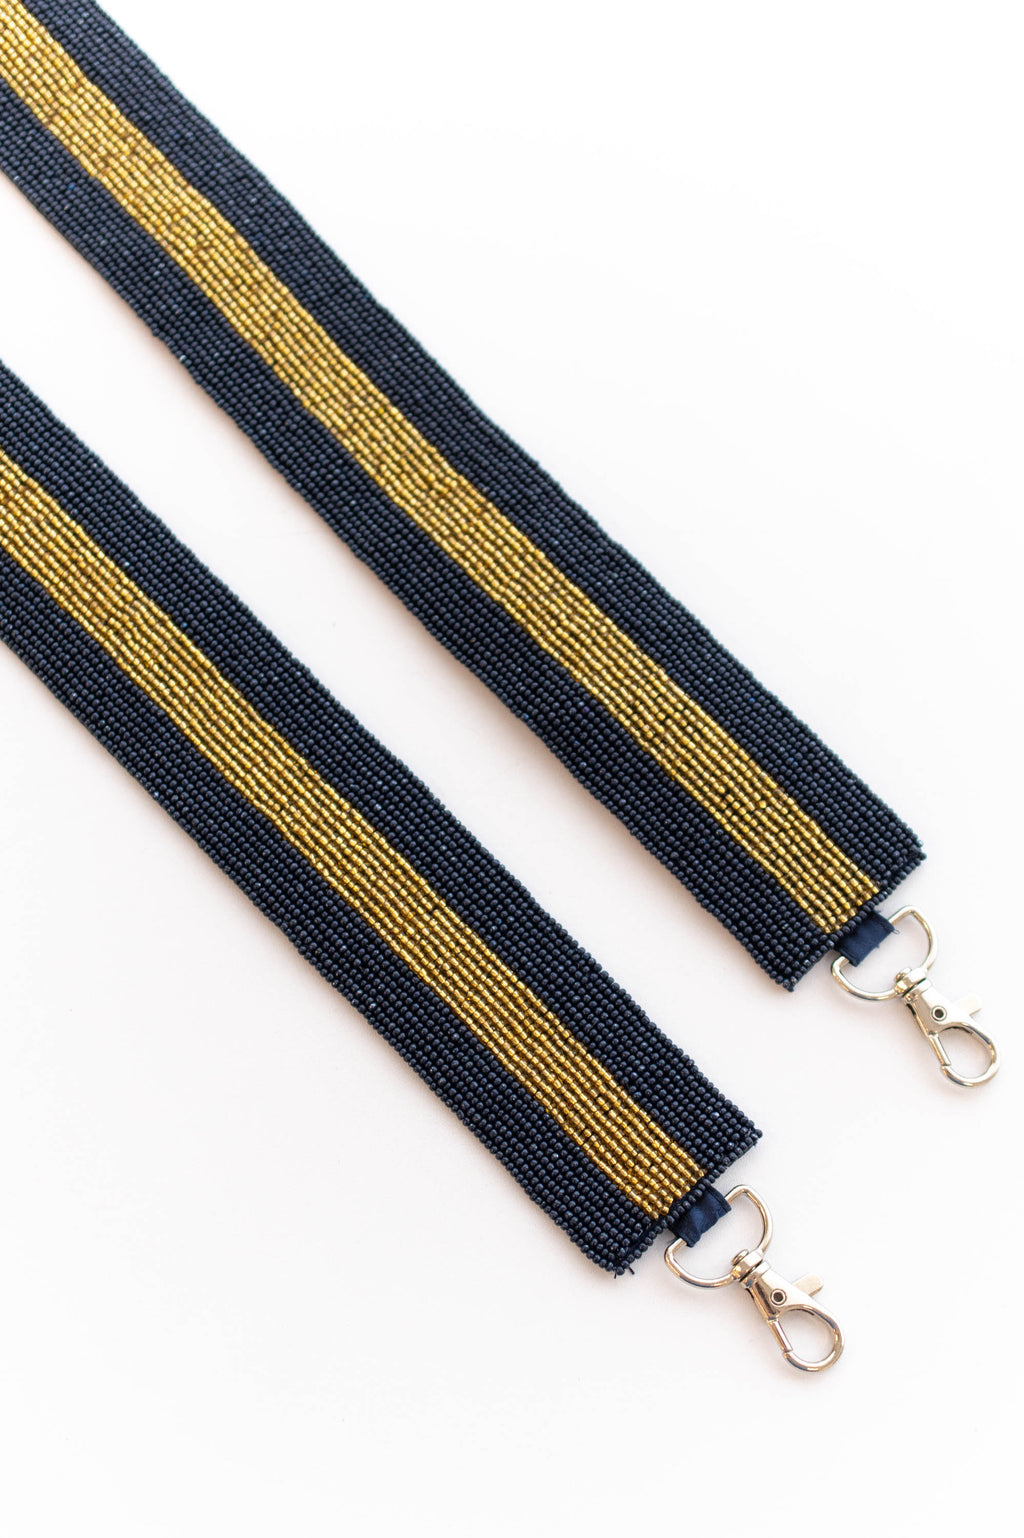 Beaded Black and Gold Purse Strap — Serenity Home & Gifts